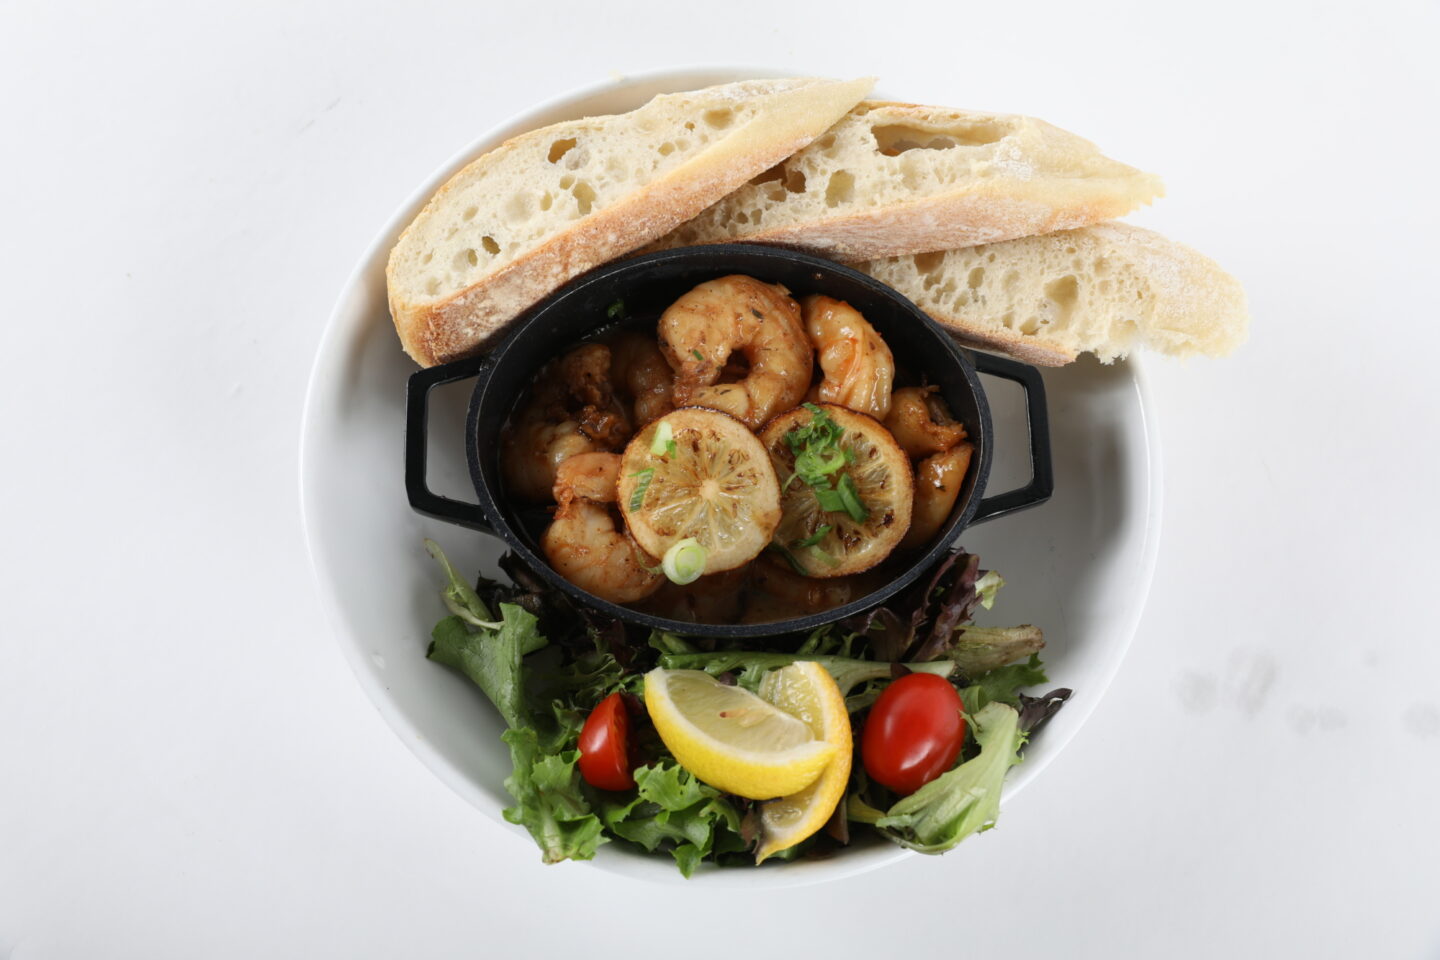 Plated meal which includes shrimp, salad, and bread